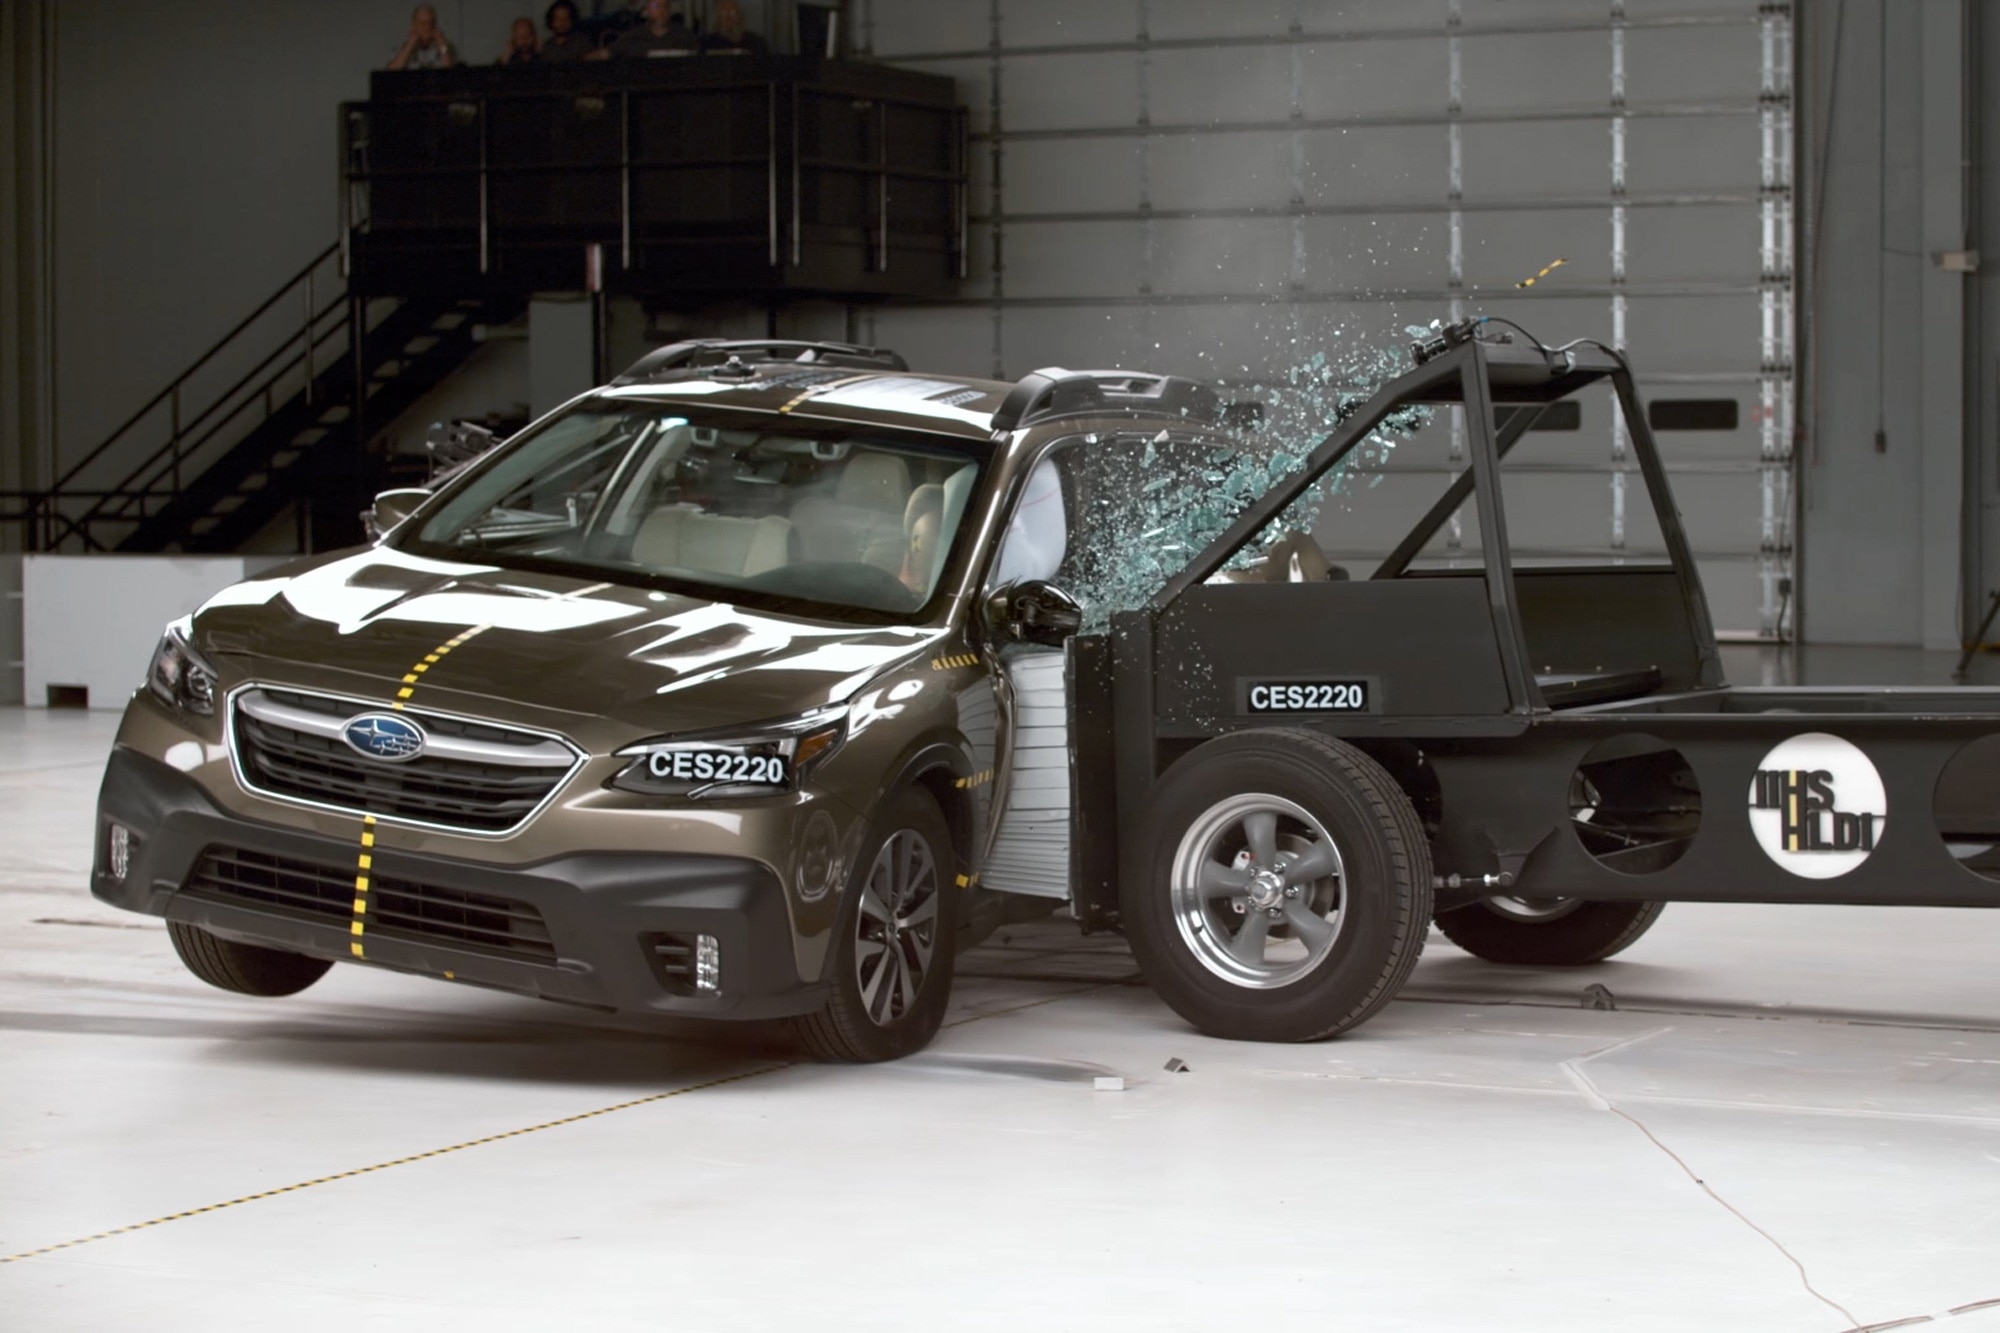 A 4,200-pound barrier is driven into the side of a Subaru Outback to test rear-seat safety